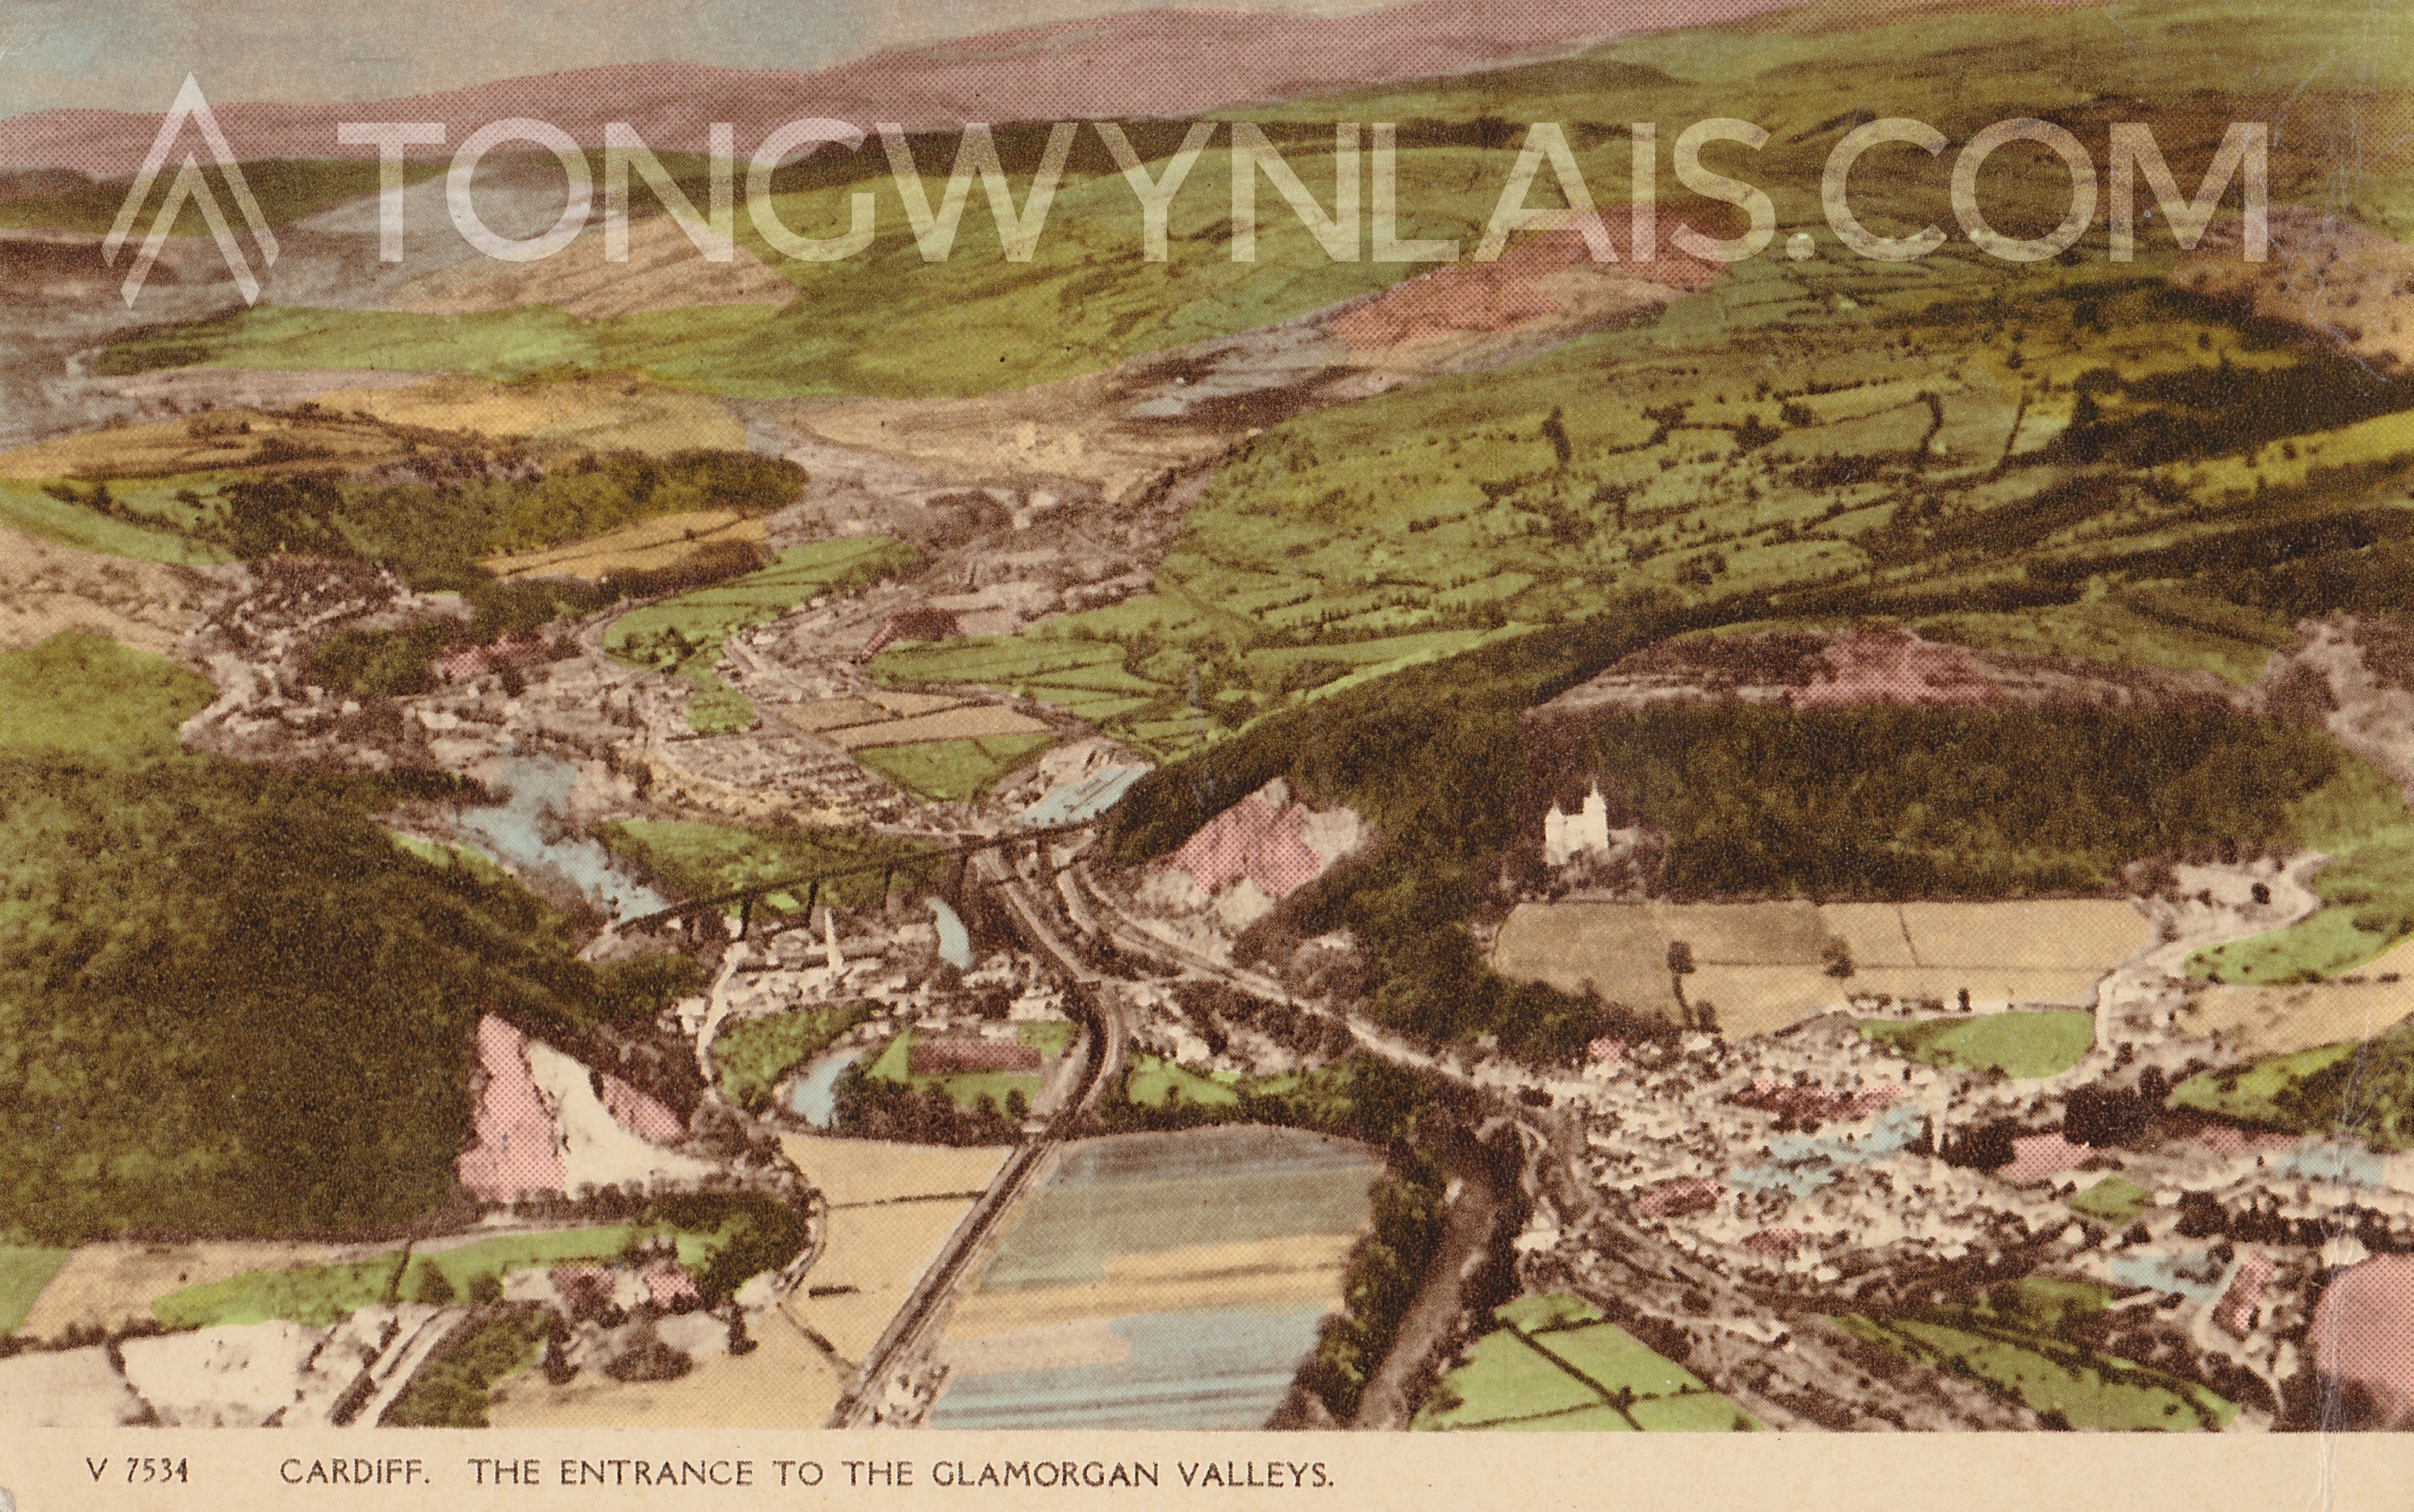 Old postcard showing aerial photo of Tongwynlais